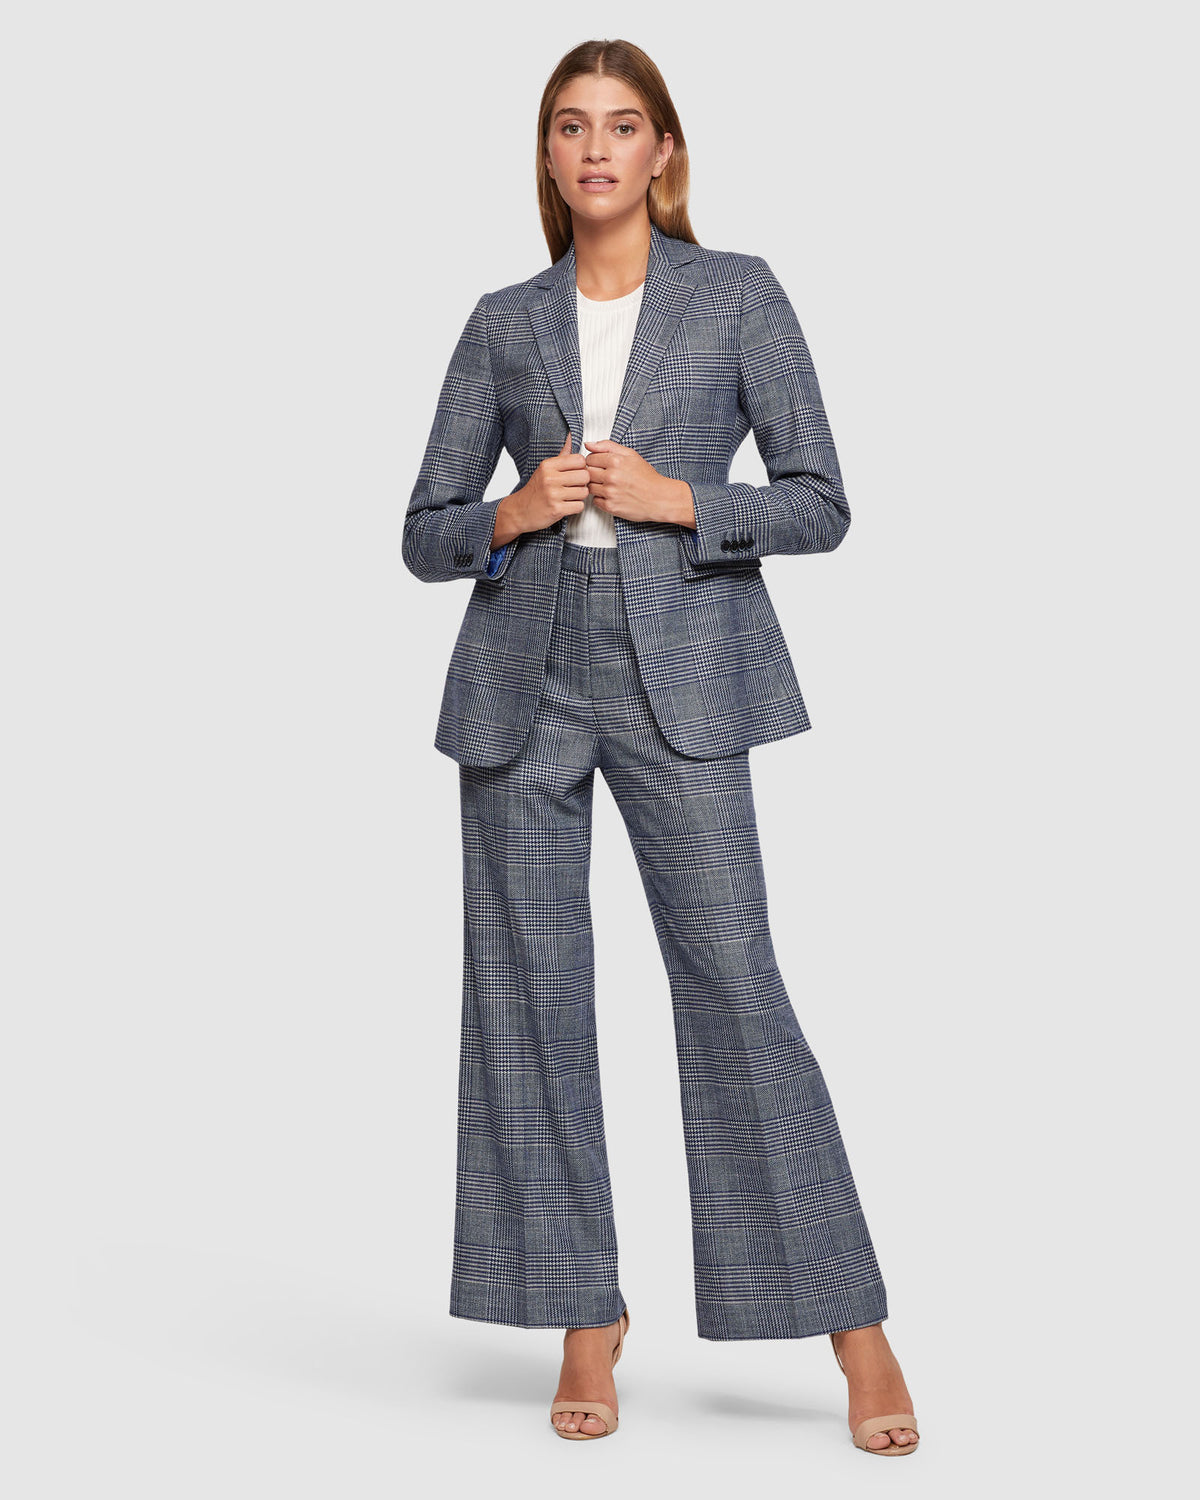 & Other Stories Wool Blend Blazer and Tailored Trousers | ASOS